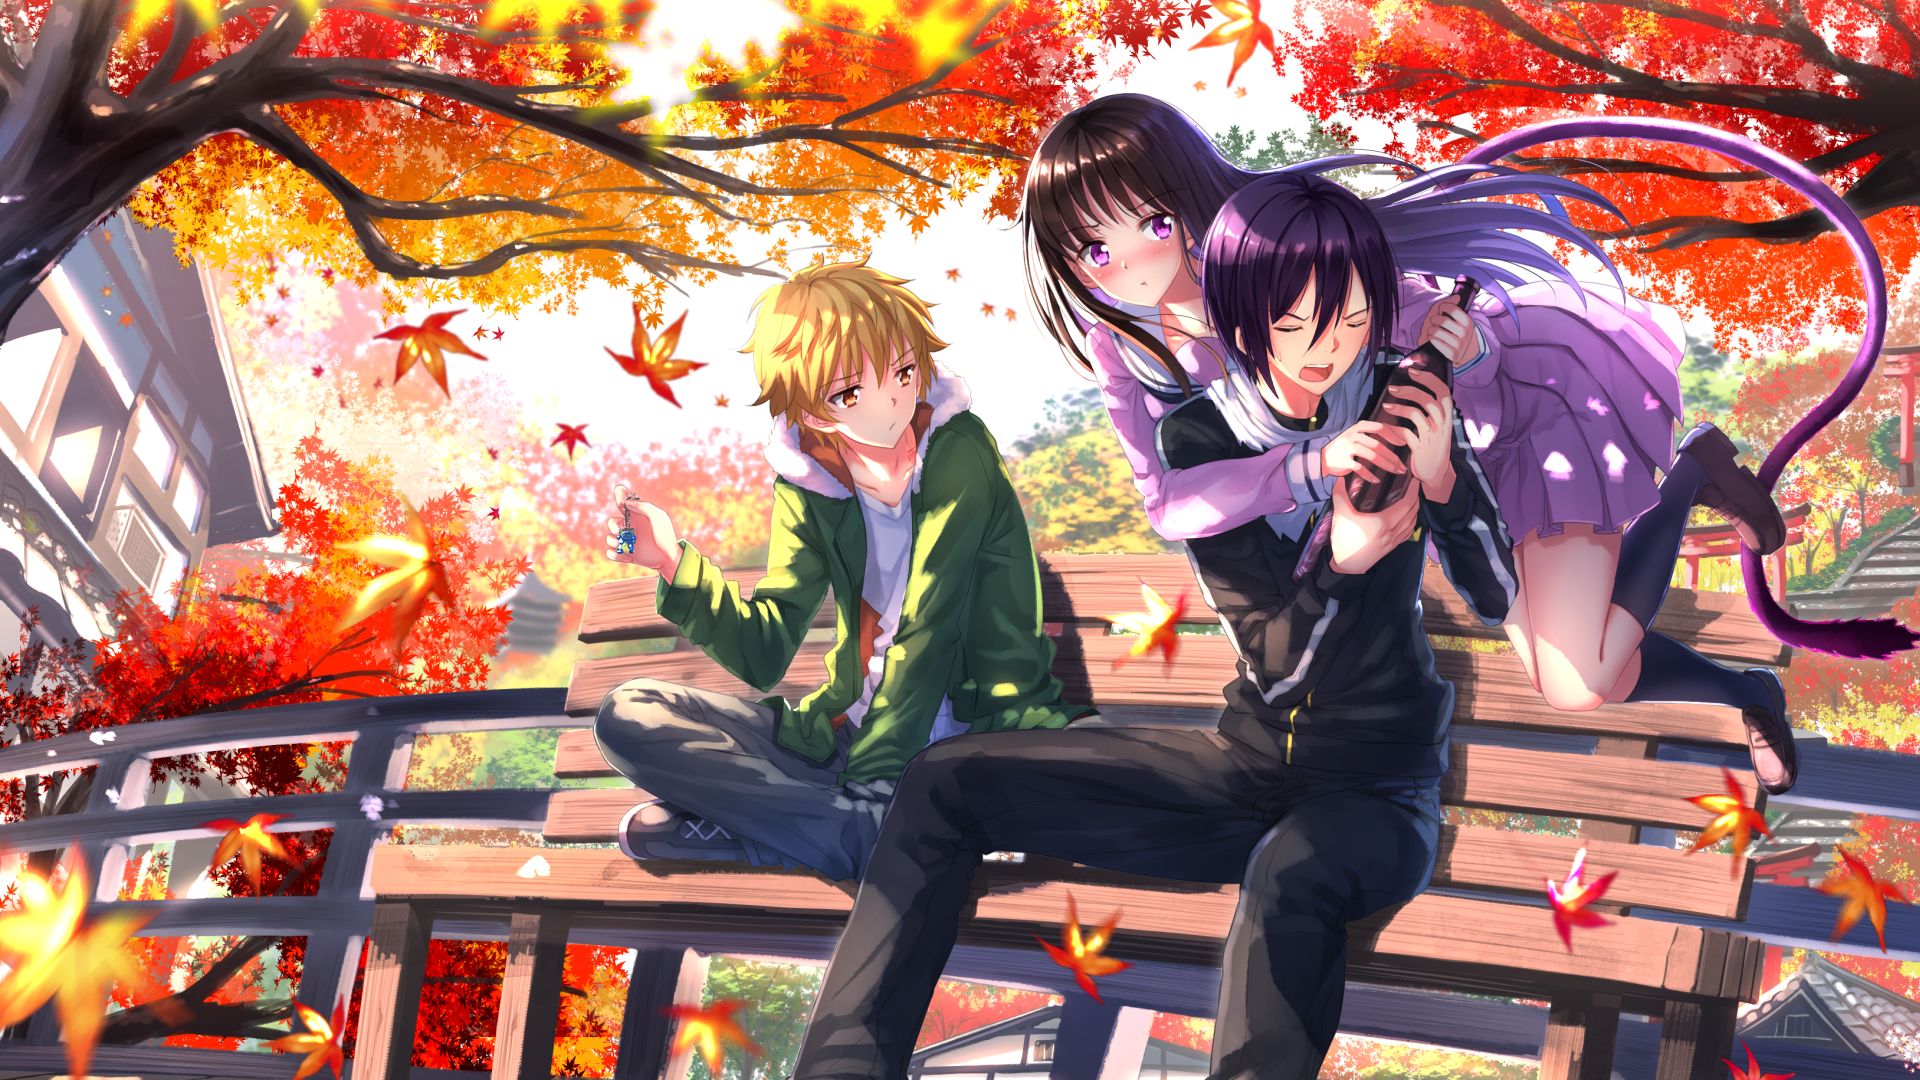  Noragami HQ Background Wallpapers